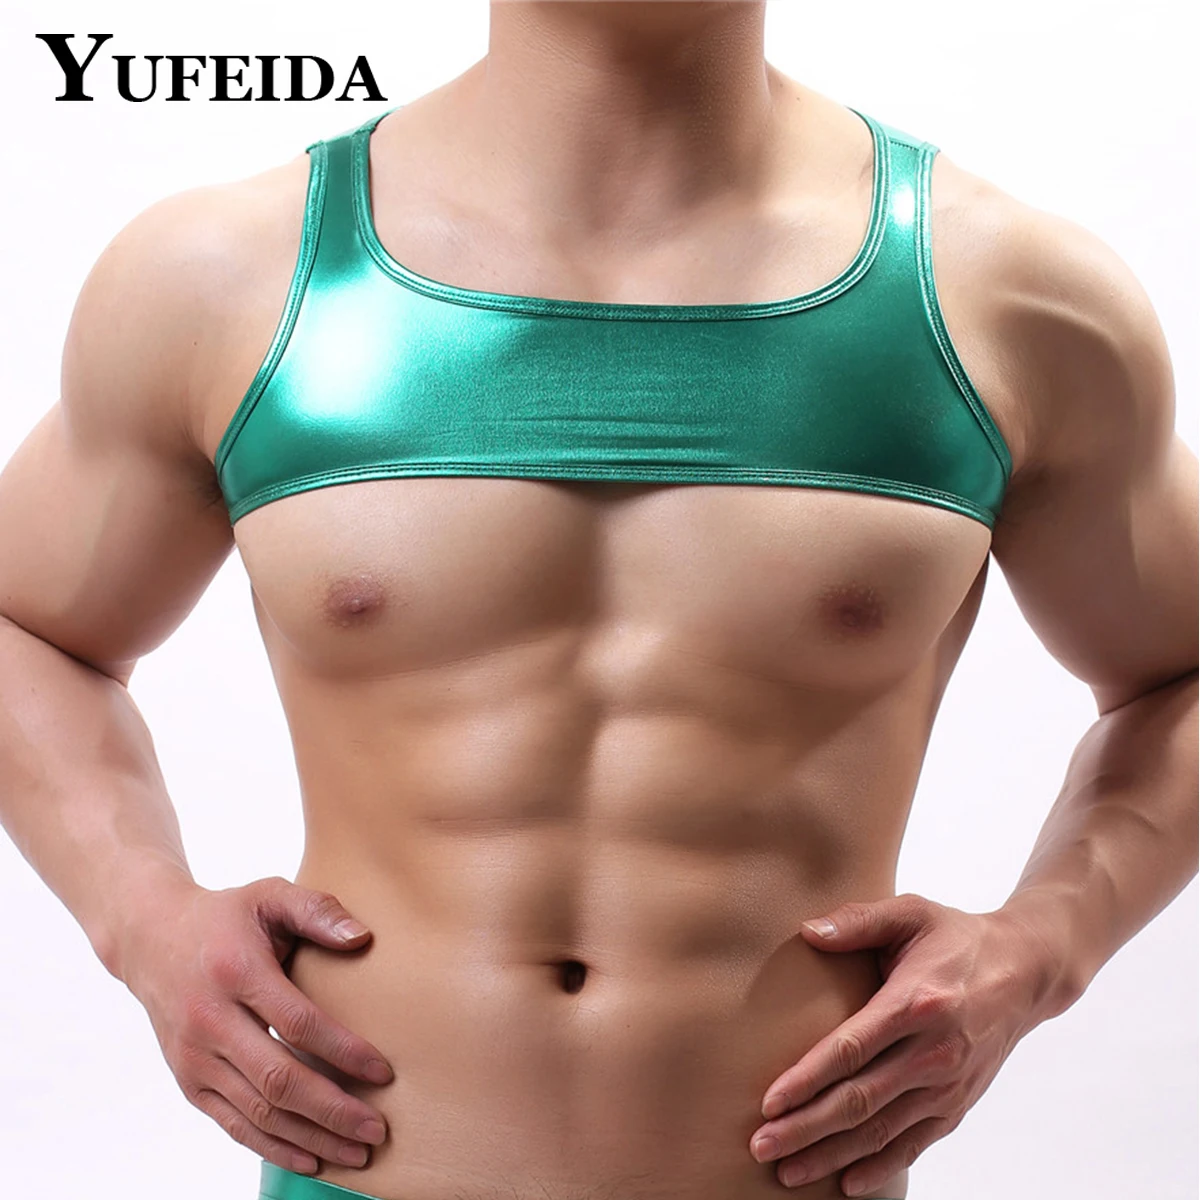 

YUFEIDA Men's Shoulder Strap Crop Top PU Leather Men Chest Harness Cropped Bodybuilding Muscle Tops Mens Stage Costume Gay Tanks